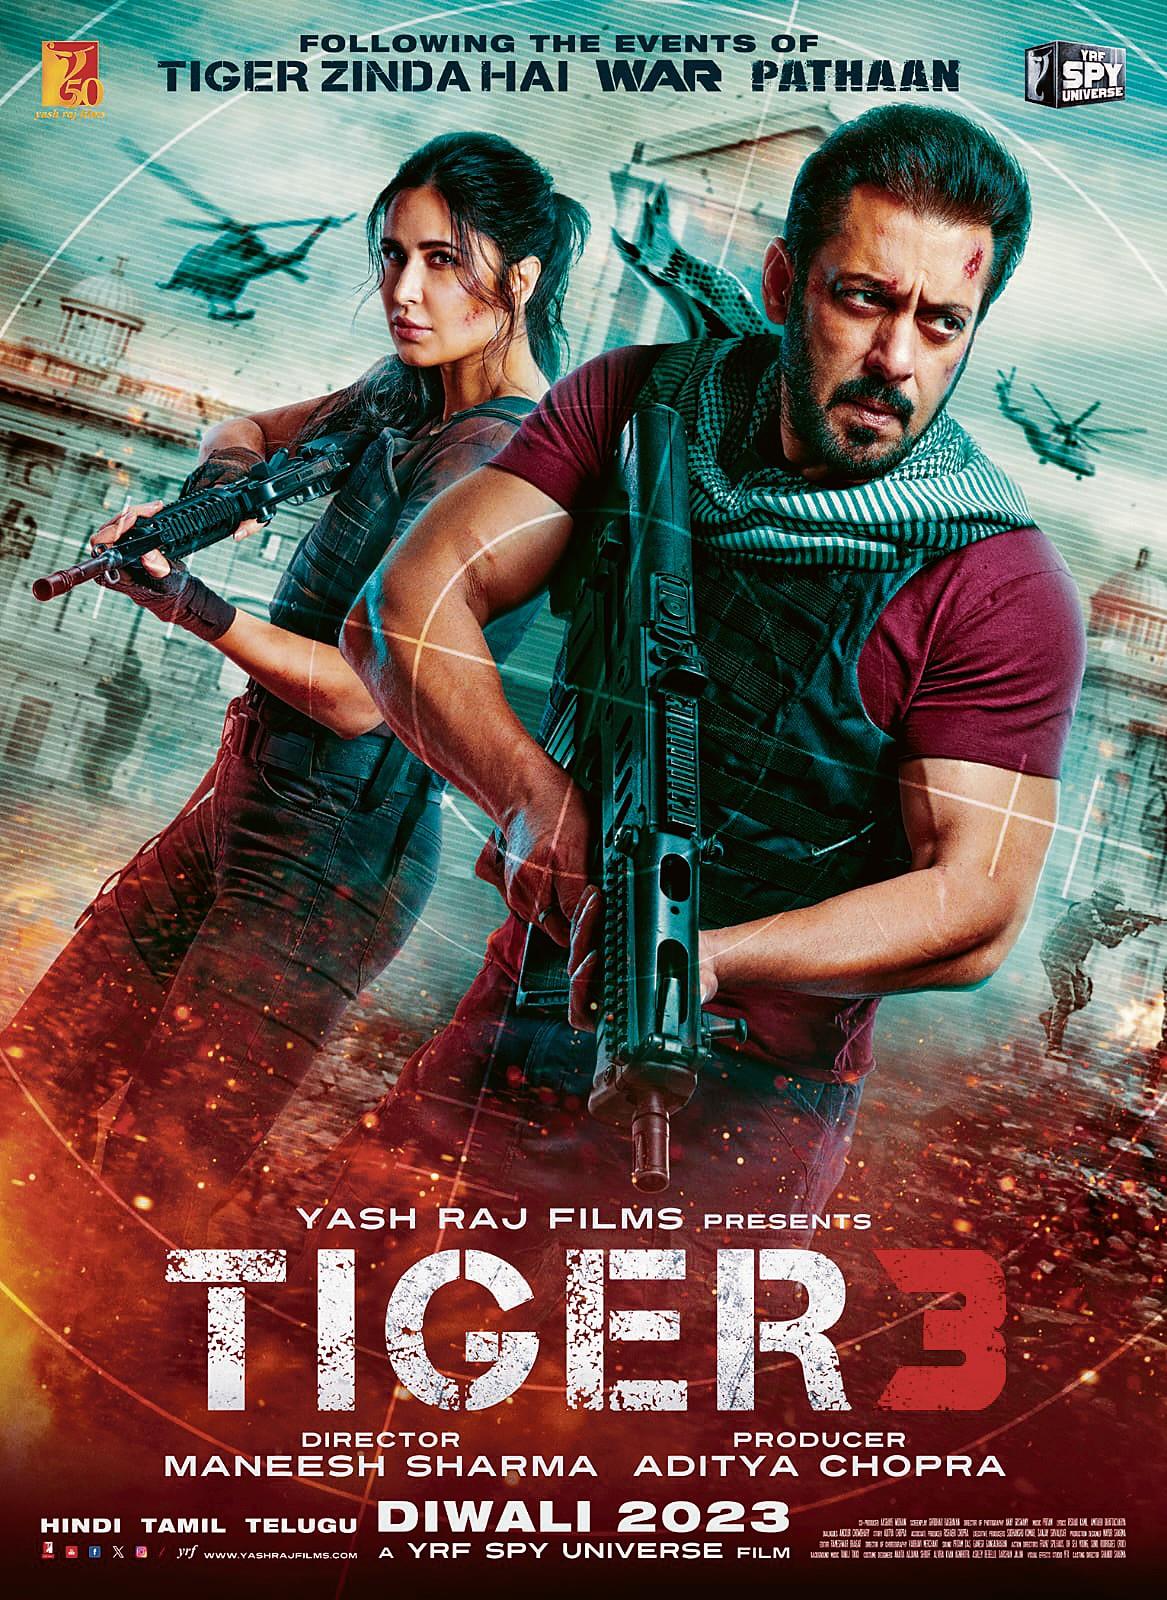 Tiger 3 poster out